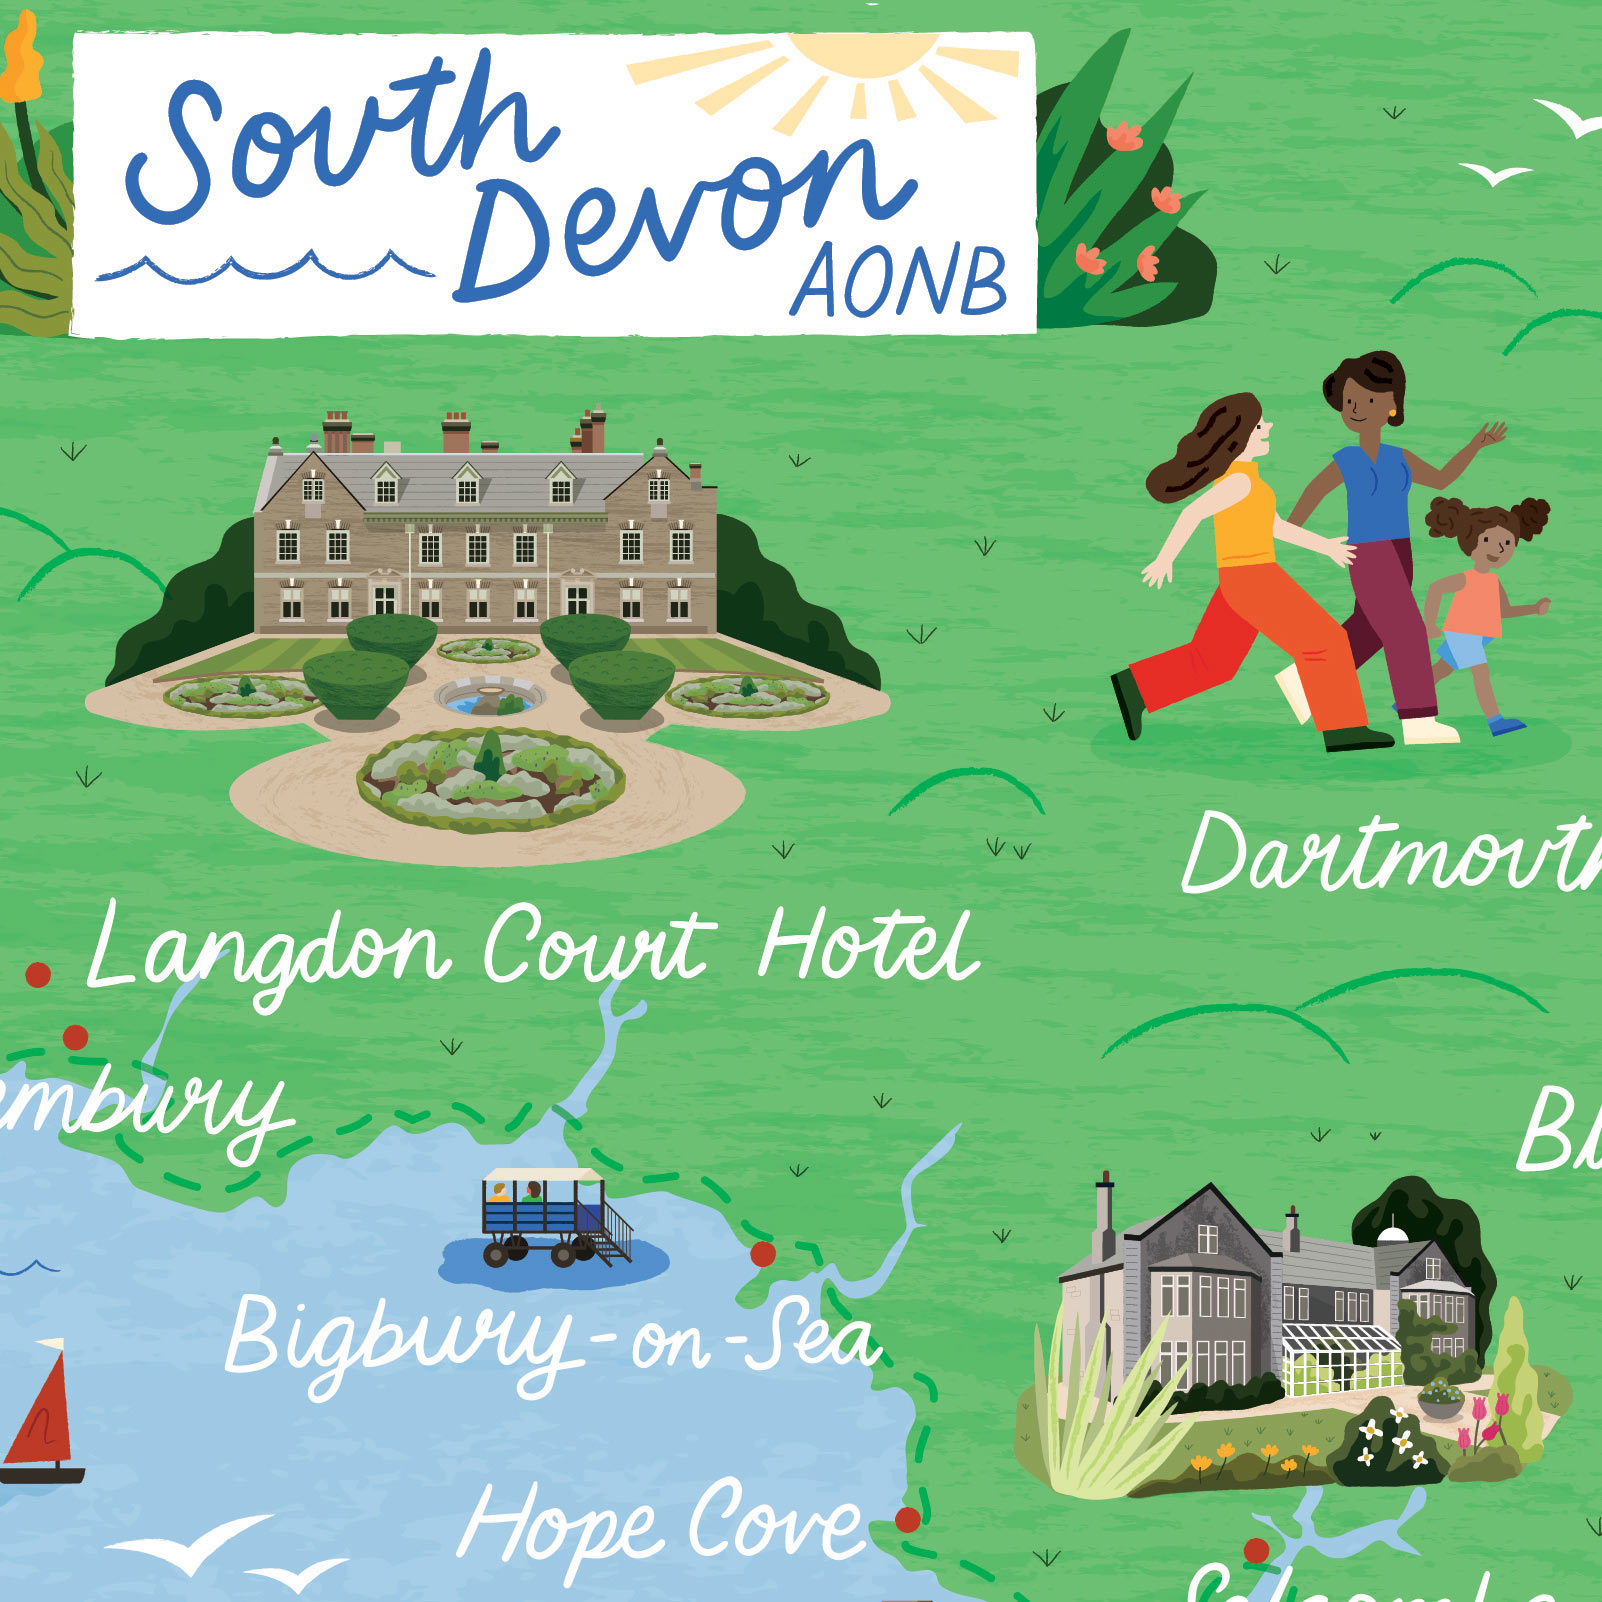 A map of South Devon for Discover Britain Magazine by Elly Jahnz